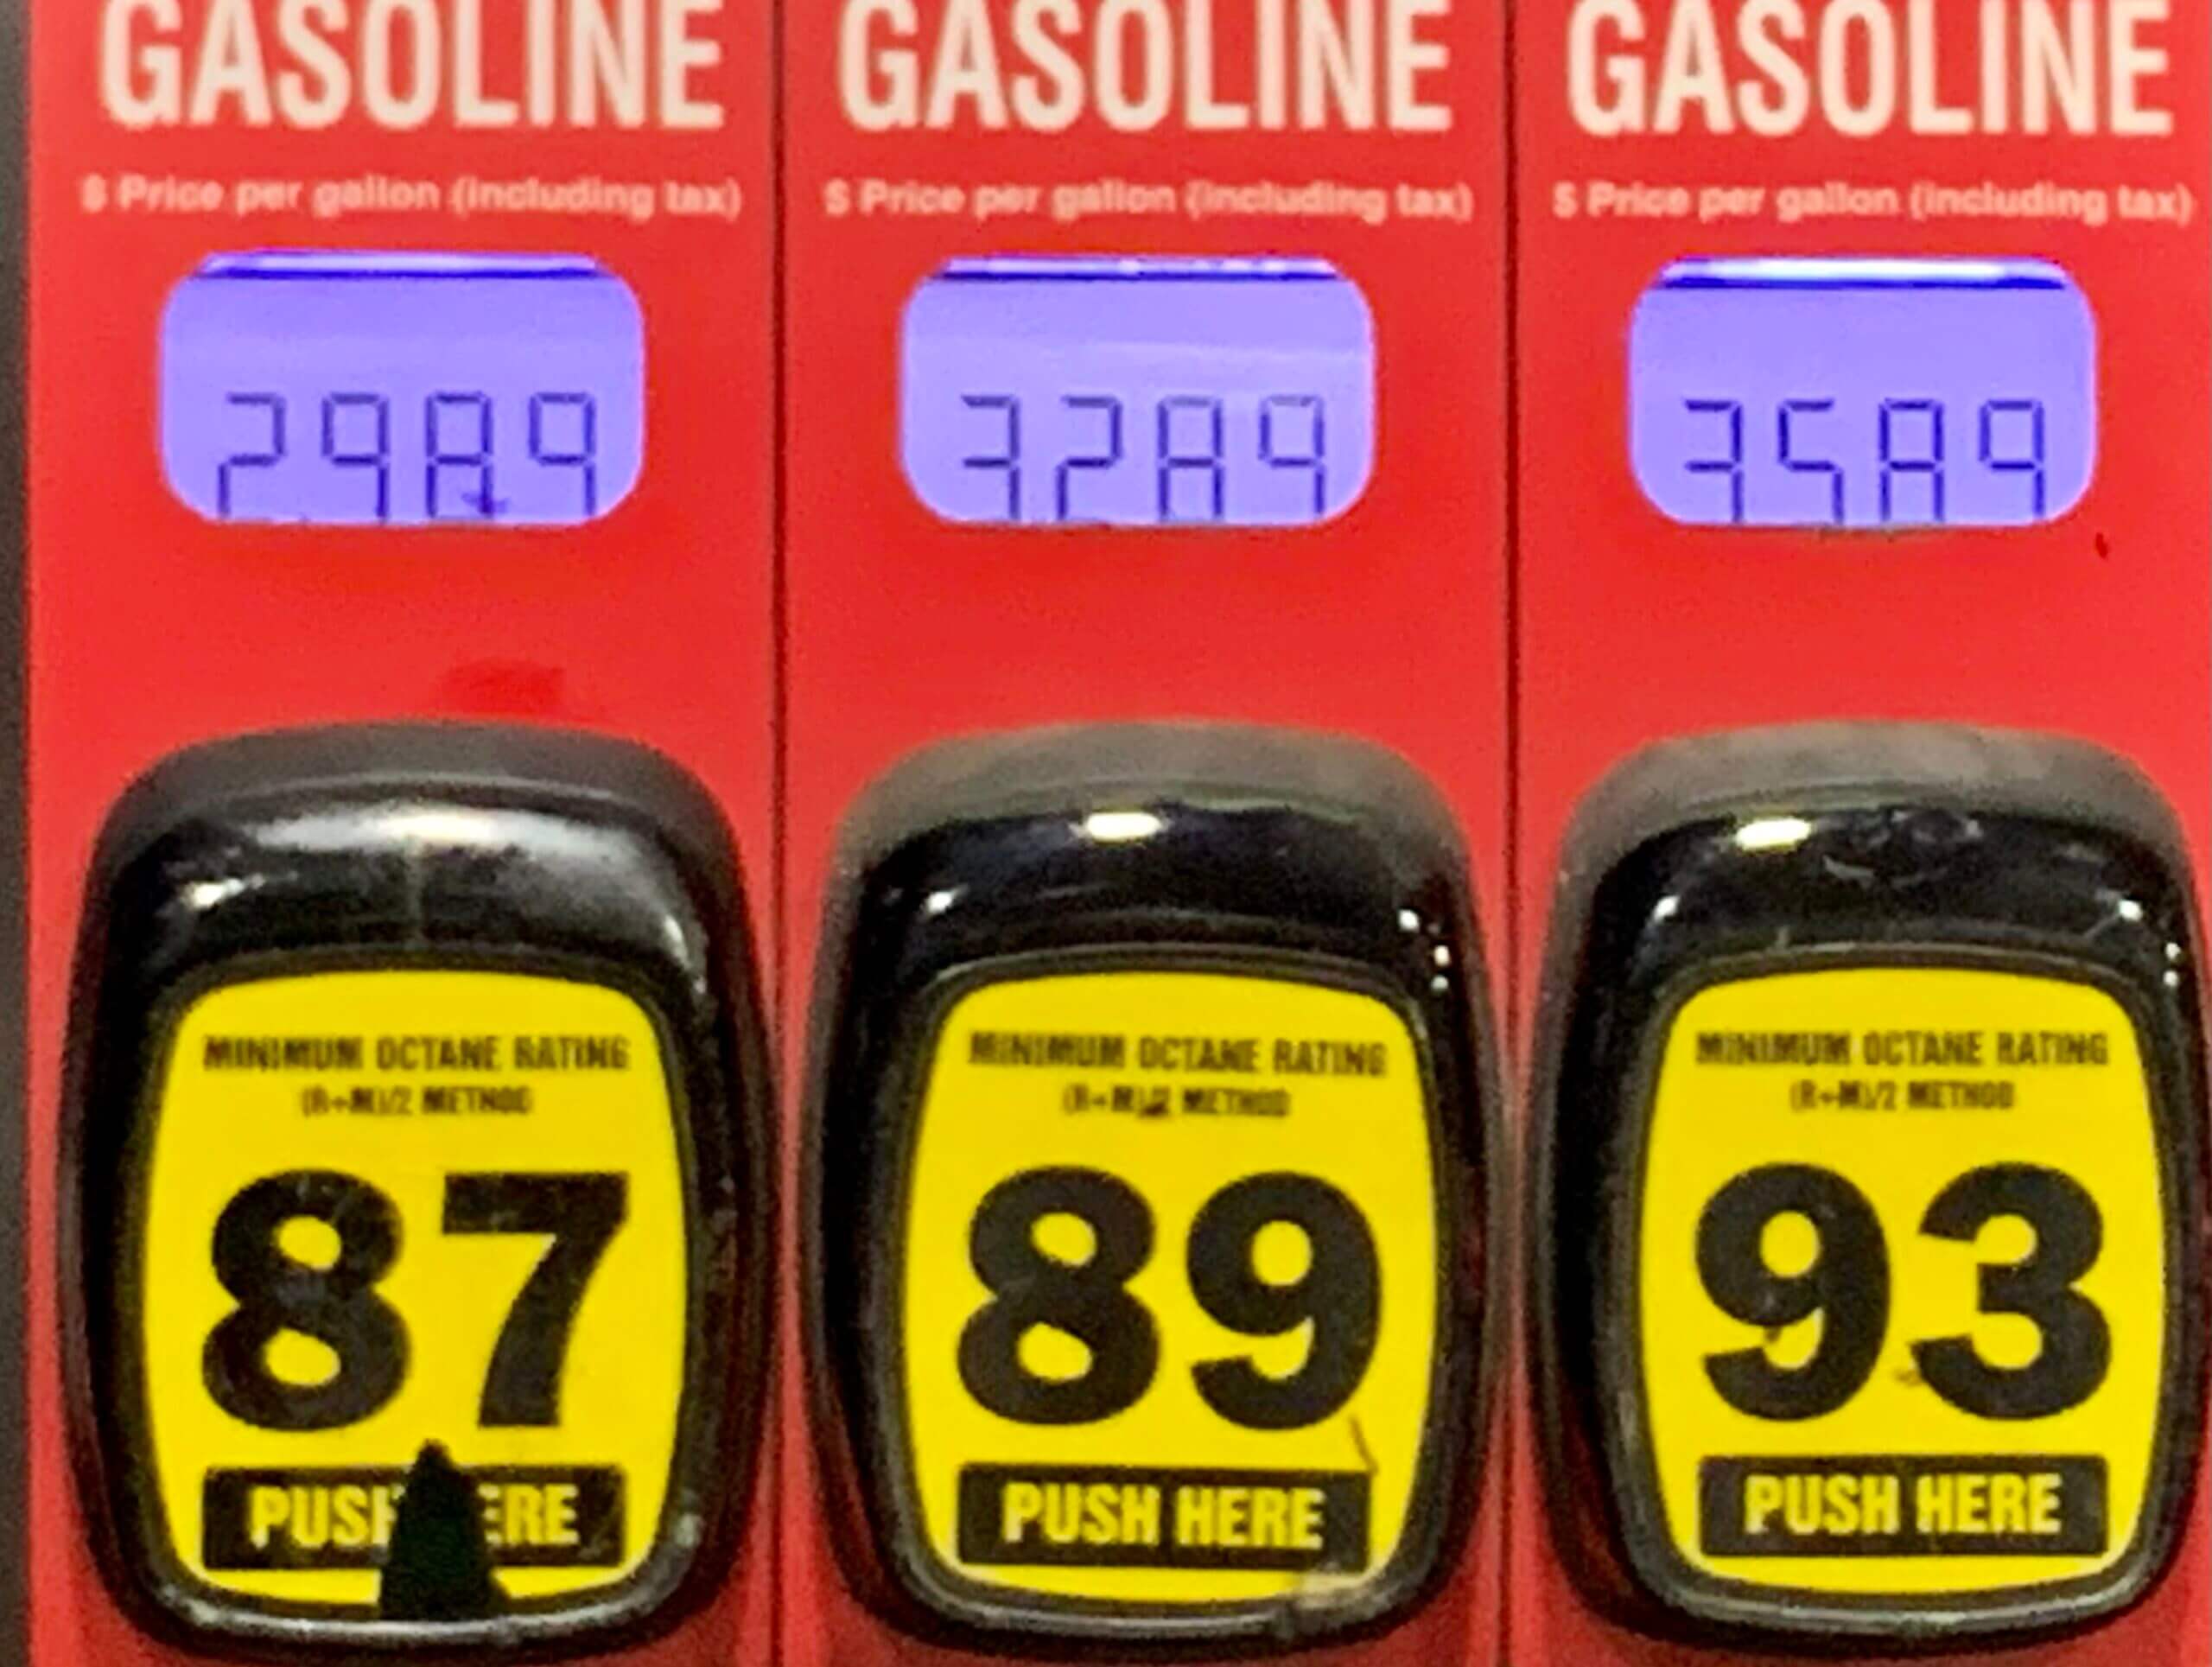 Gasoline prices back on the rise again